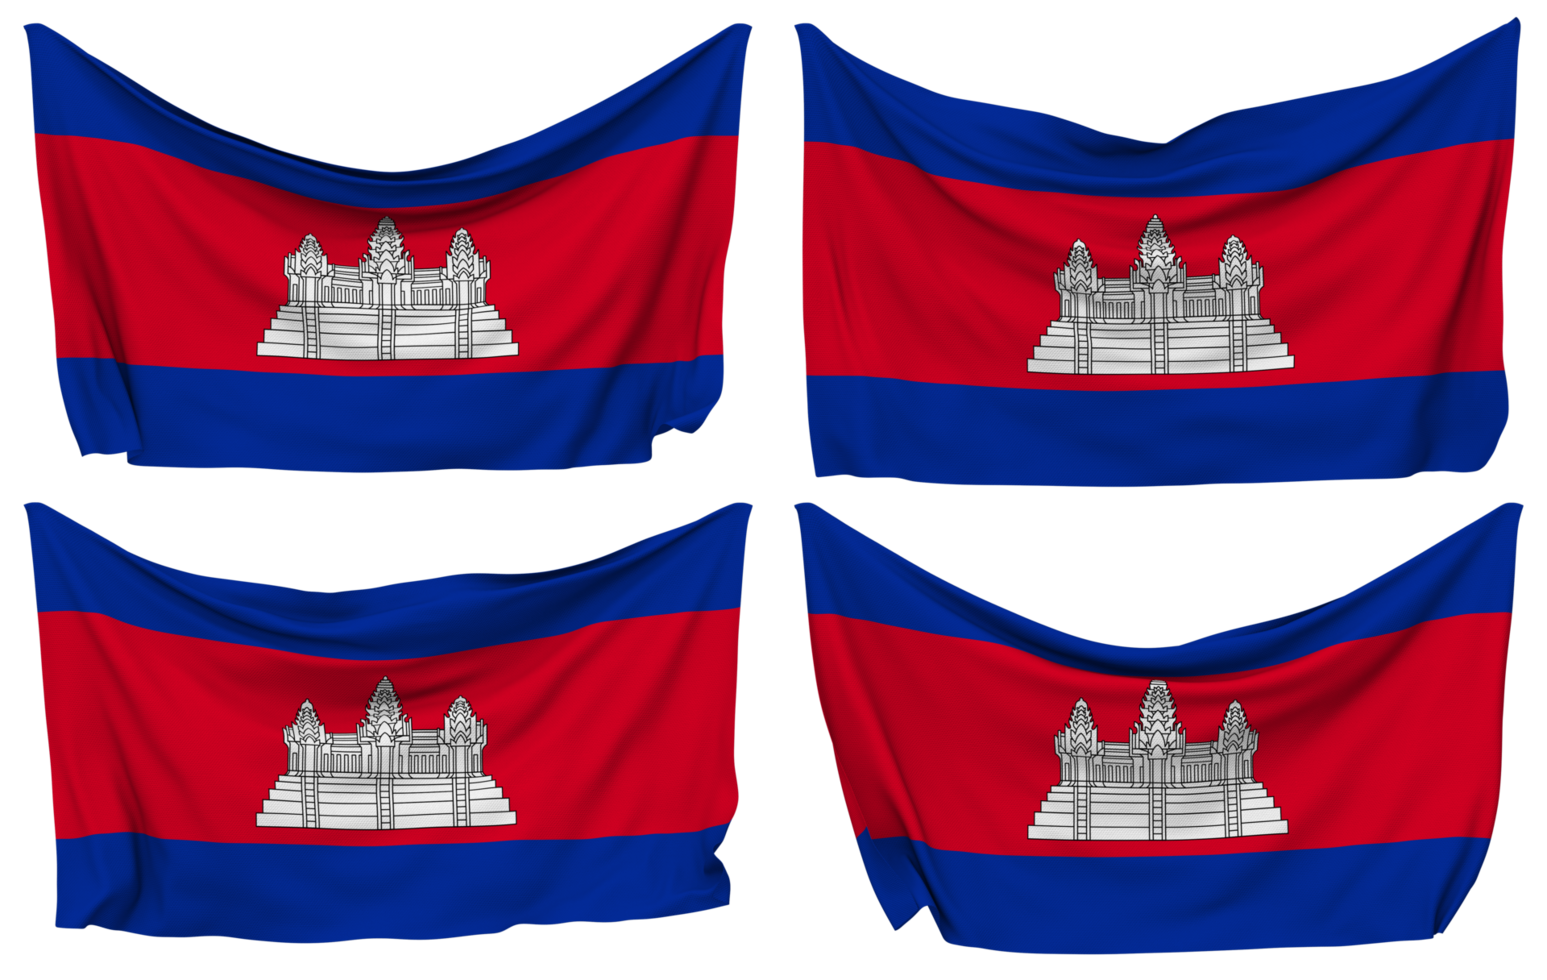 Cambodia Pinned Flag from Corners, Isolated with Different Waving Variations, 3D Rendering png